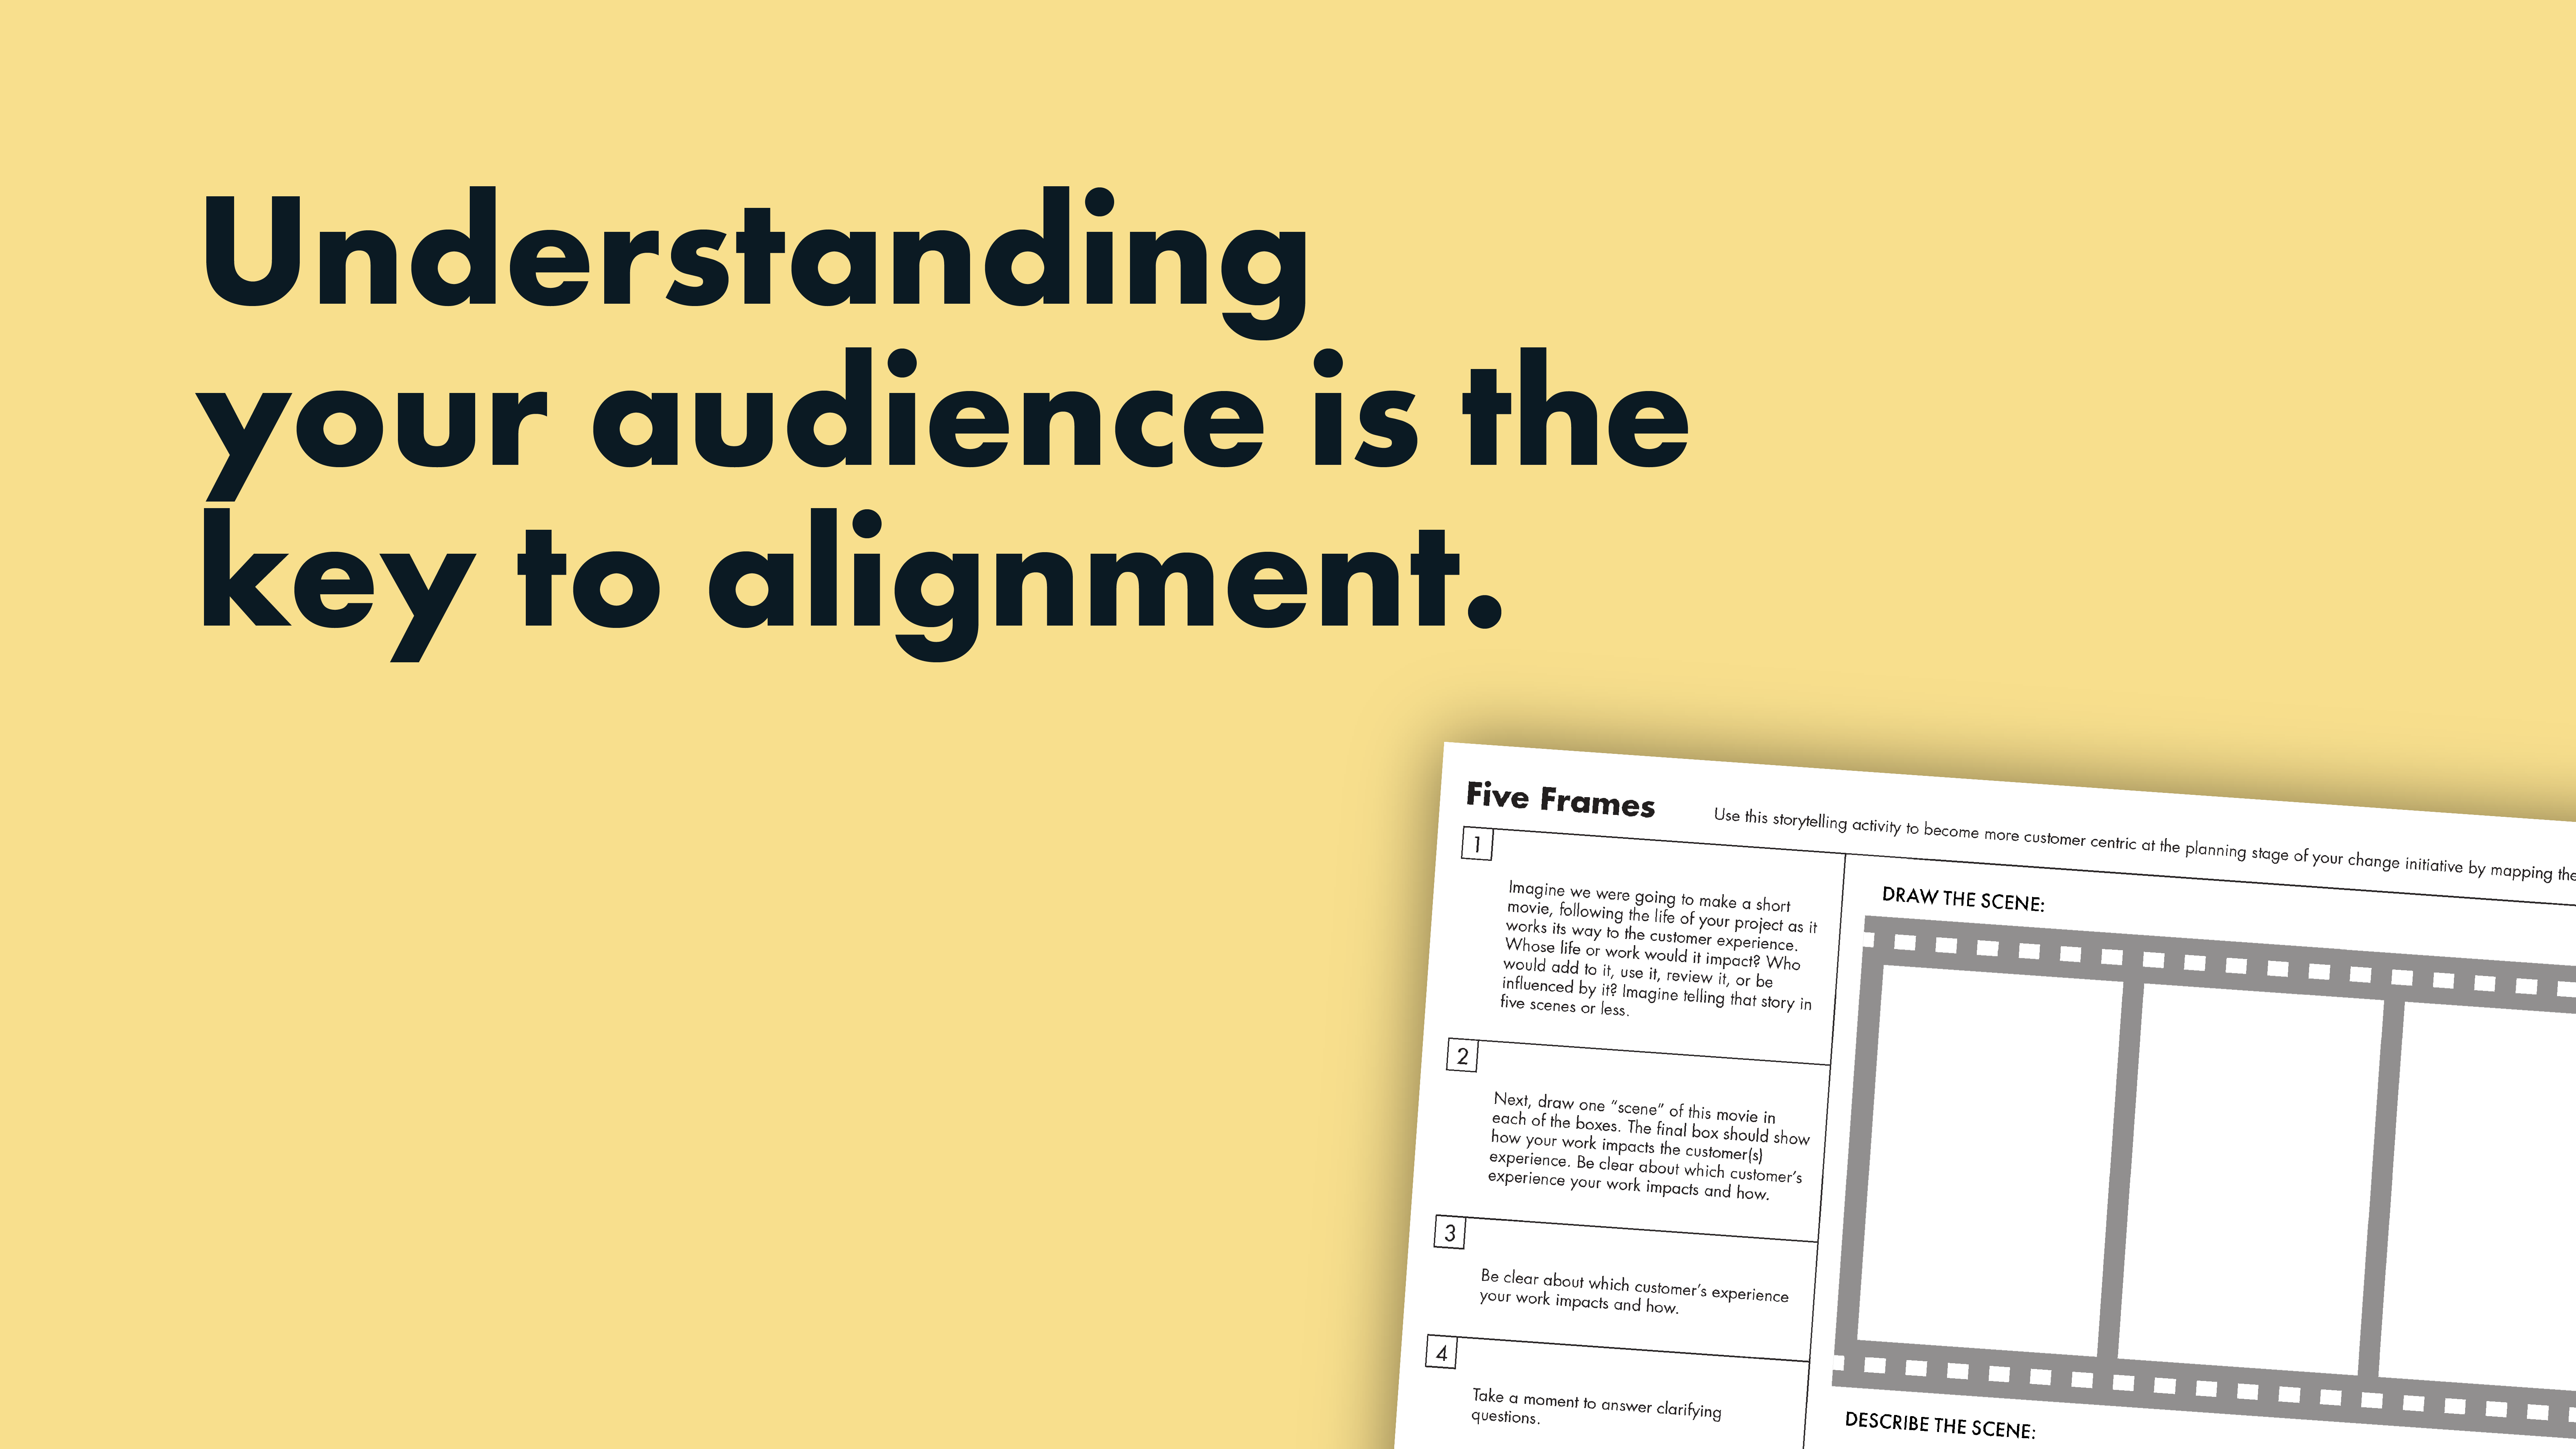 Text reading "Understanding your audience is the key to alignment." This is besides the worksheet available for download.